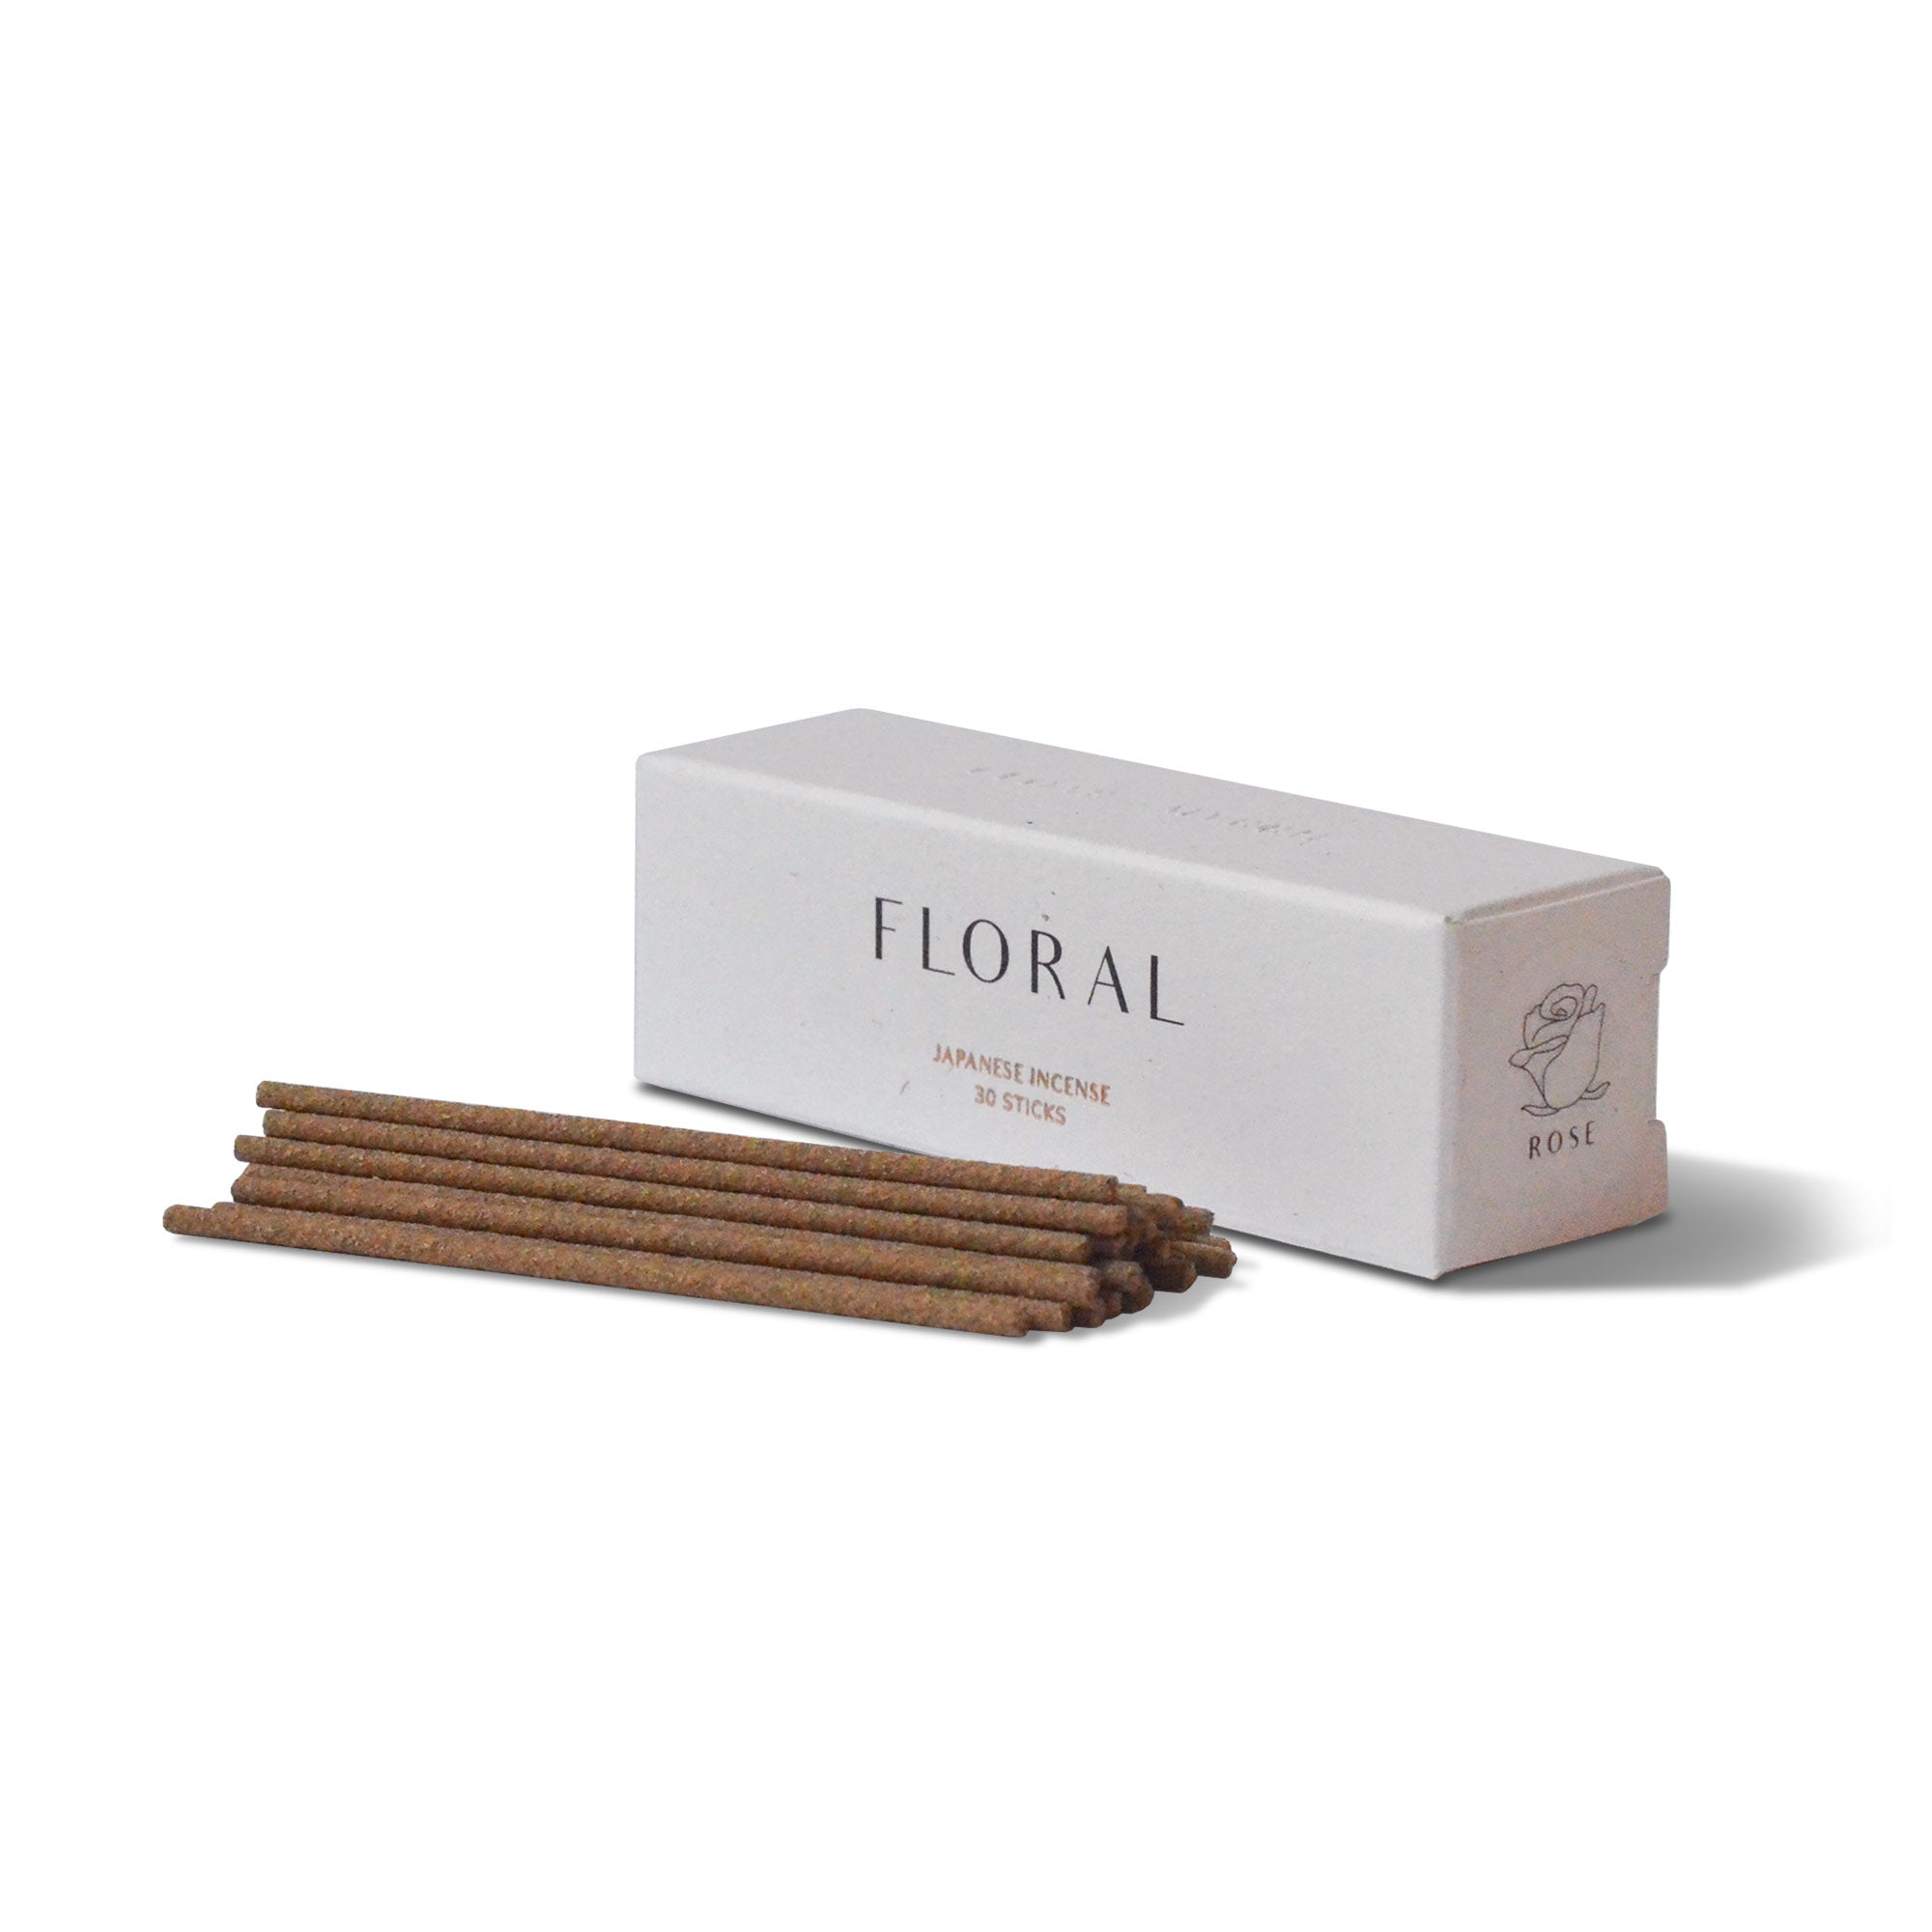 Rose Japanese Incense with a package